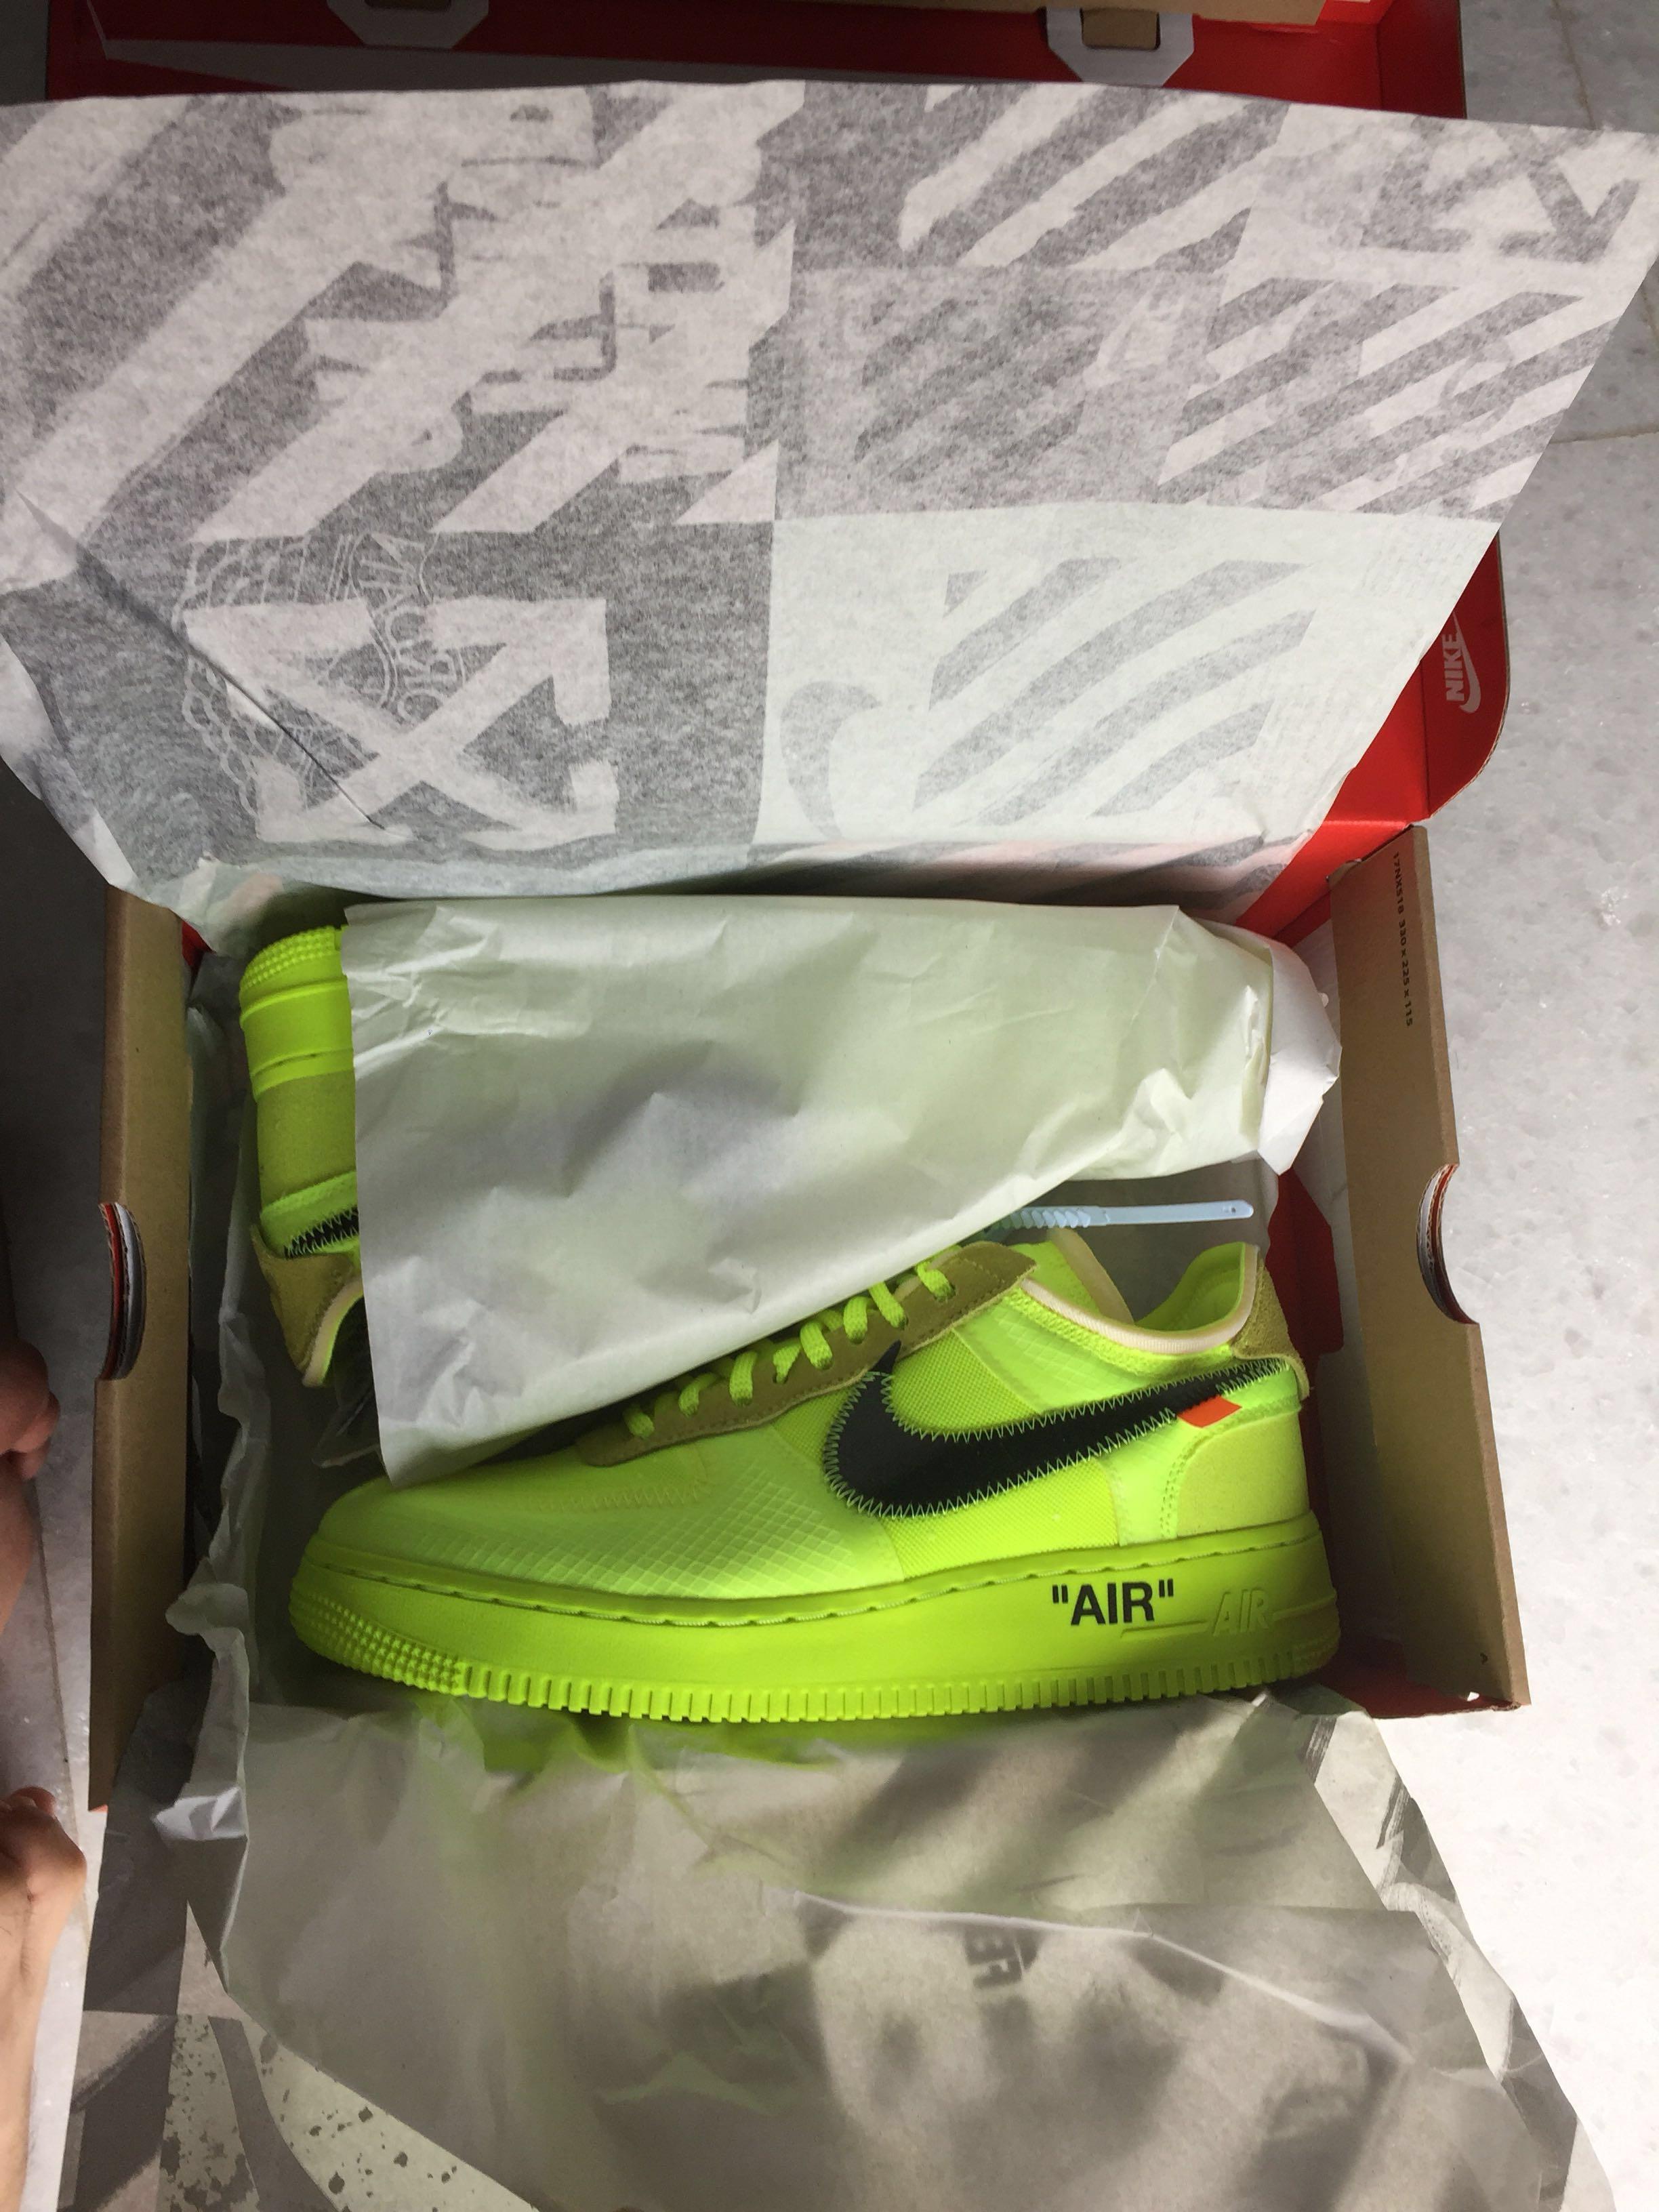 off white air force 1 raffle